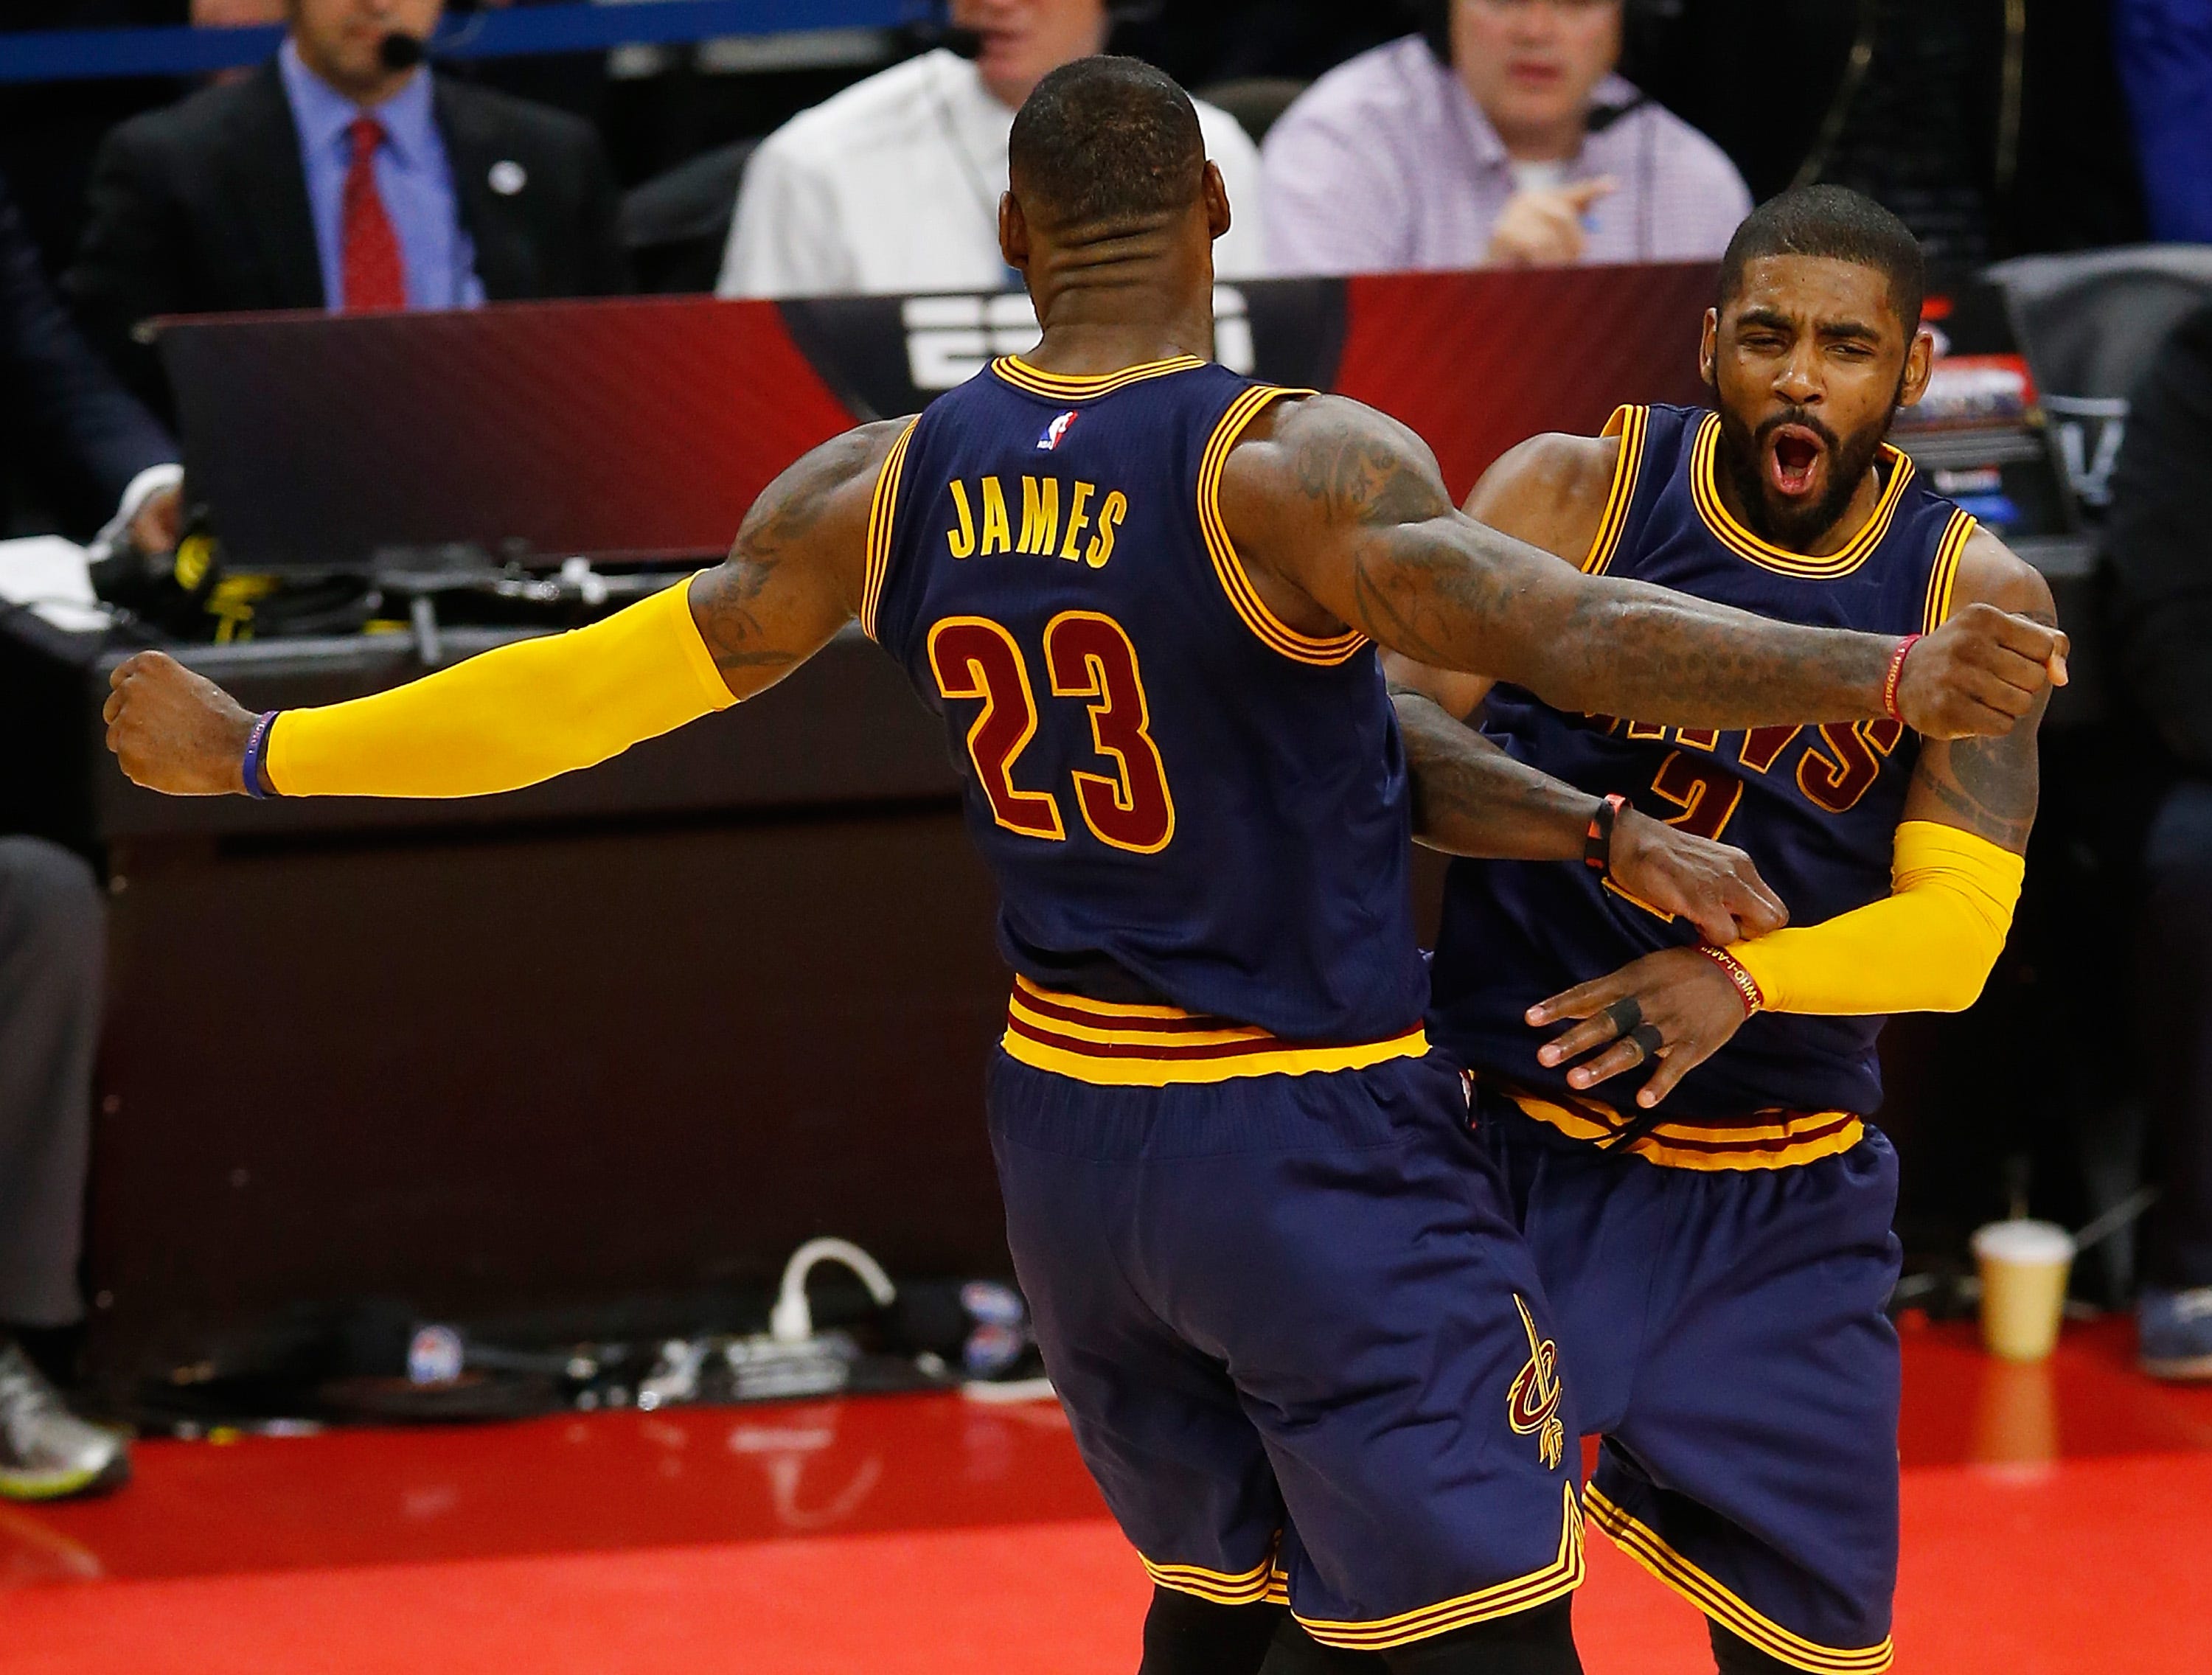 Pressure point: Irving, Cavs face crucial Game 3 in finals